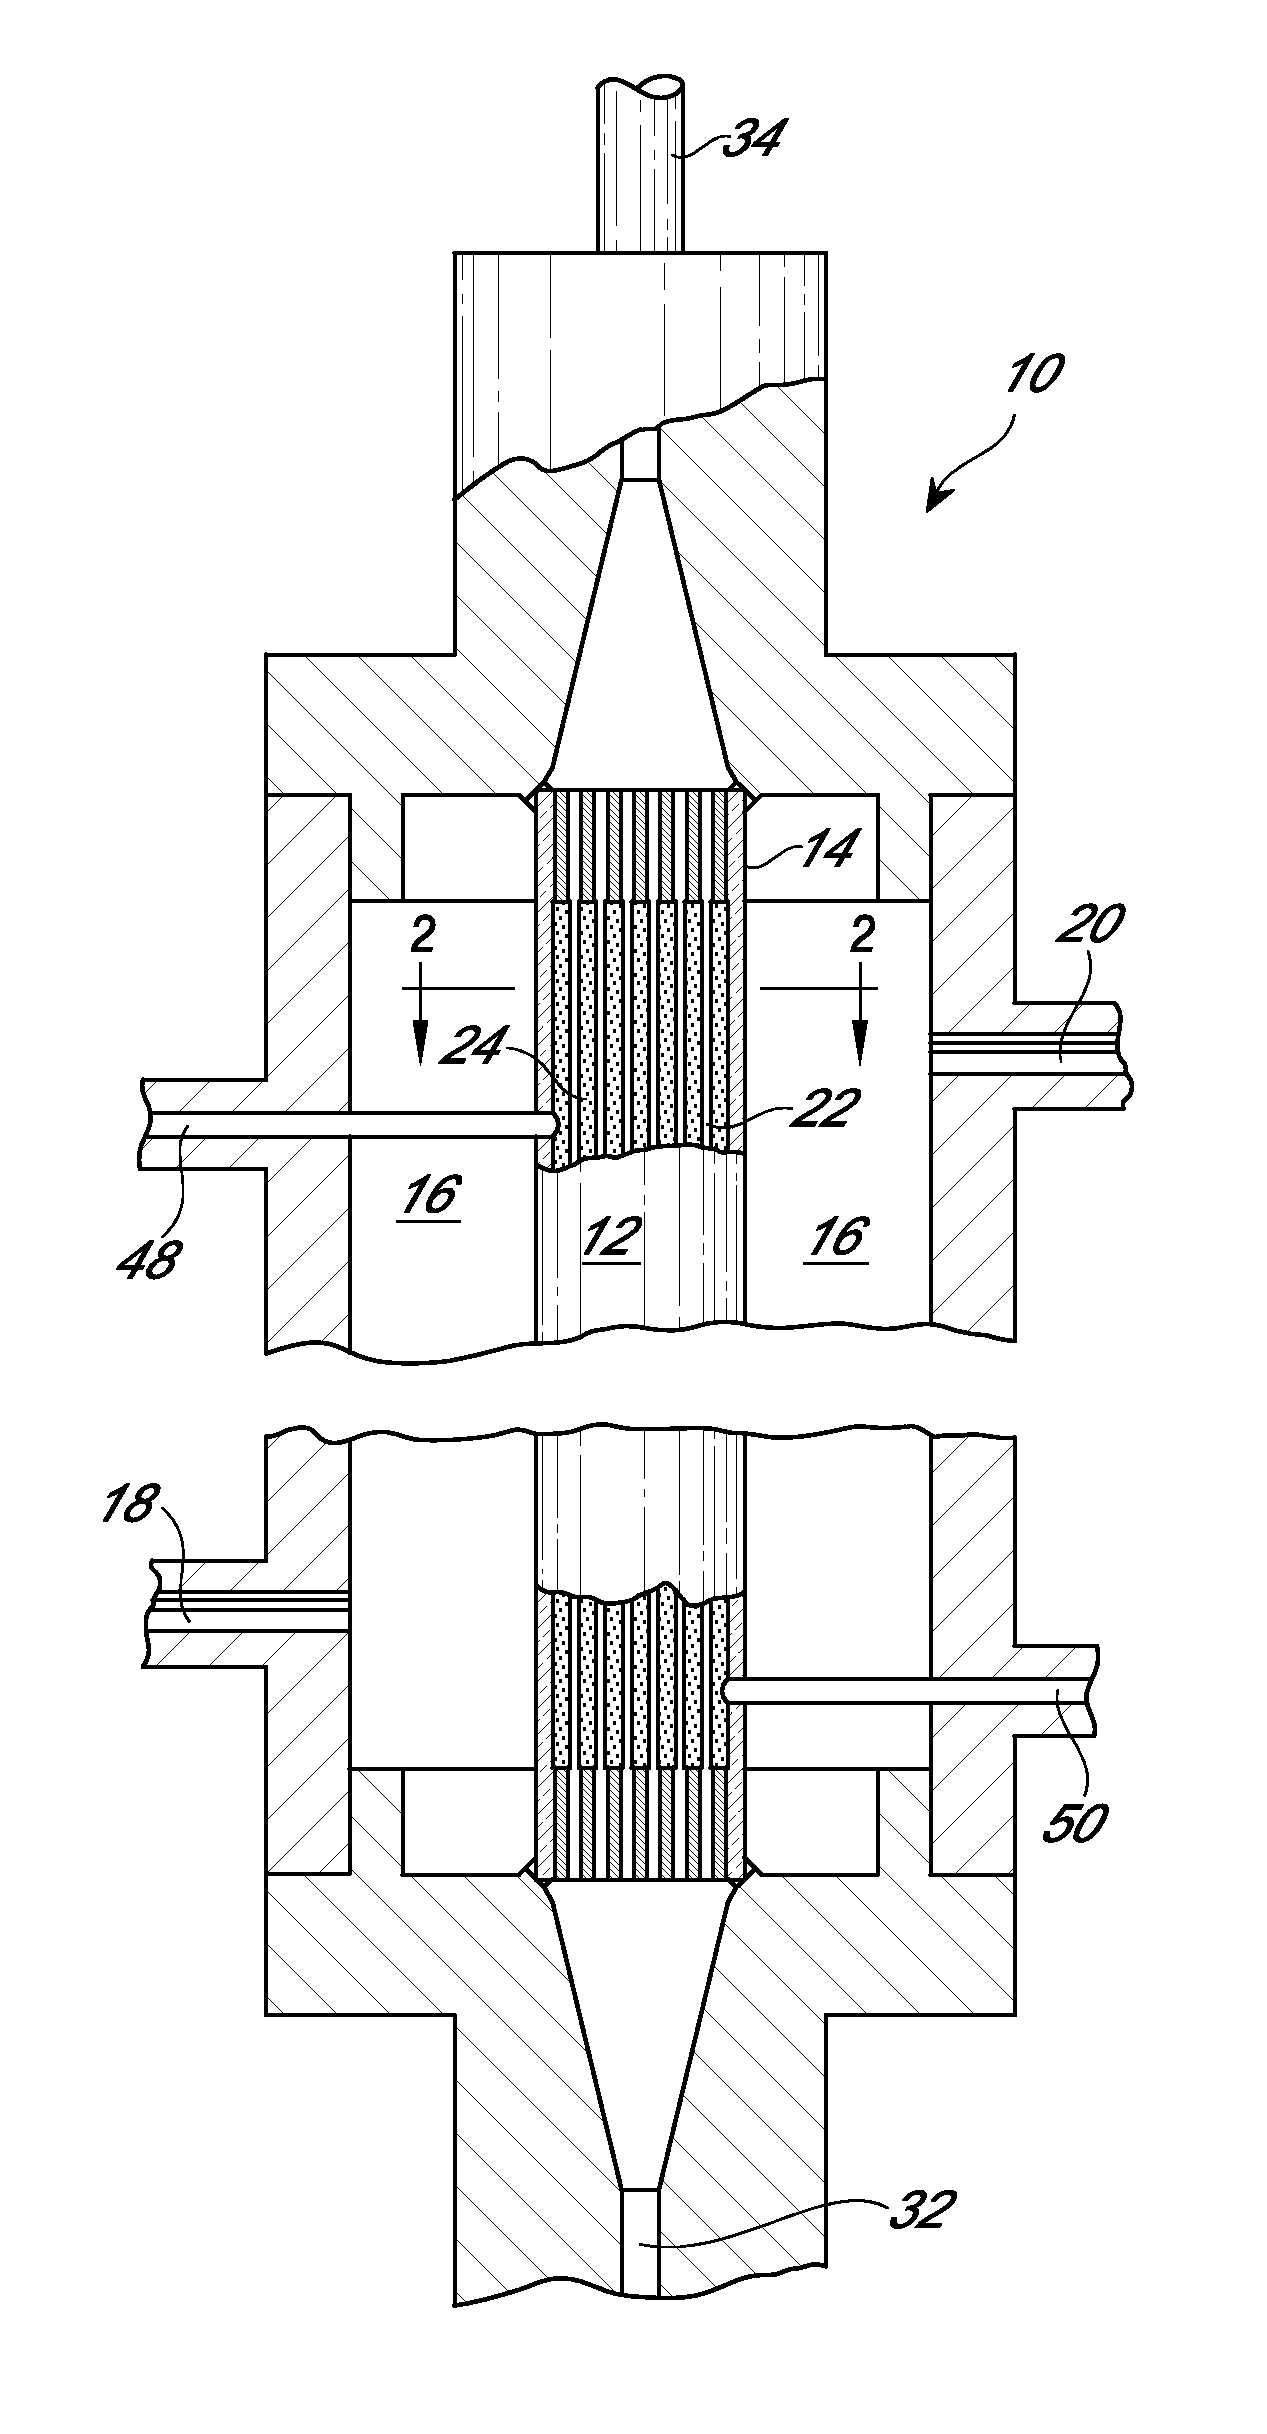 Device and method for purifying virally infected blood